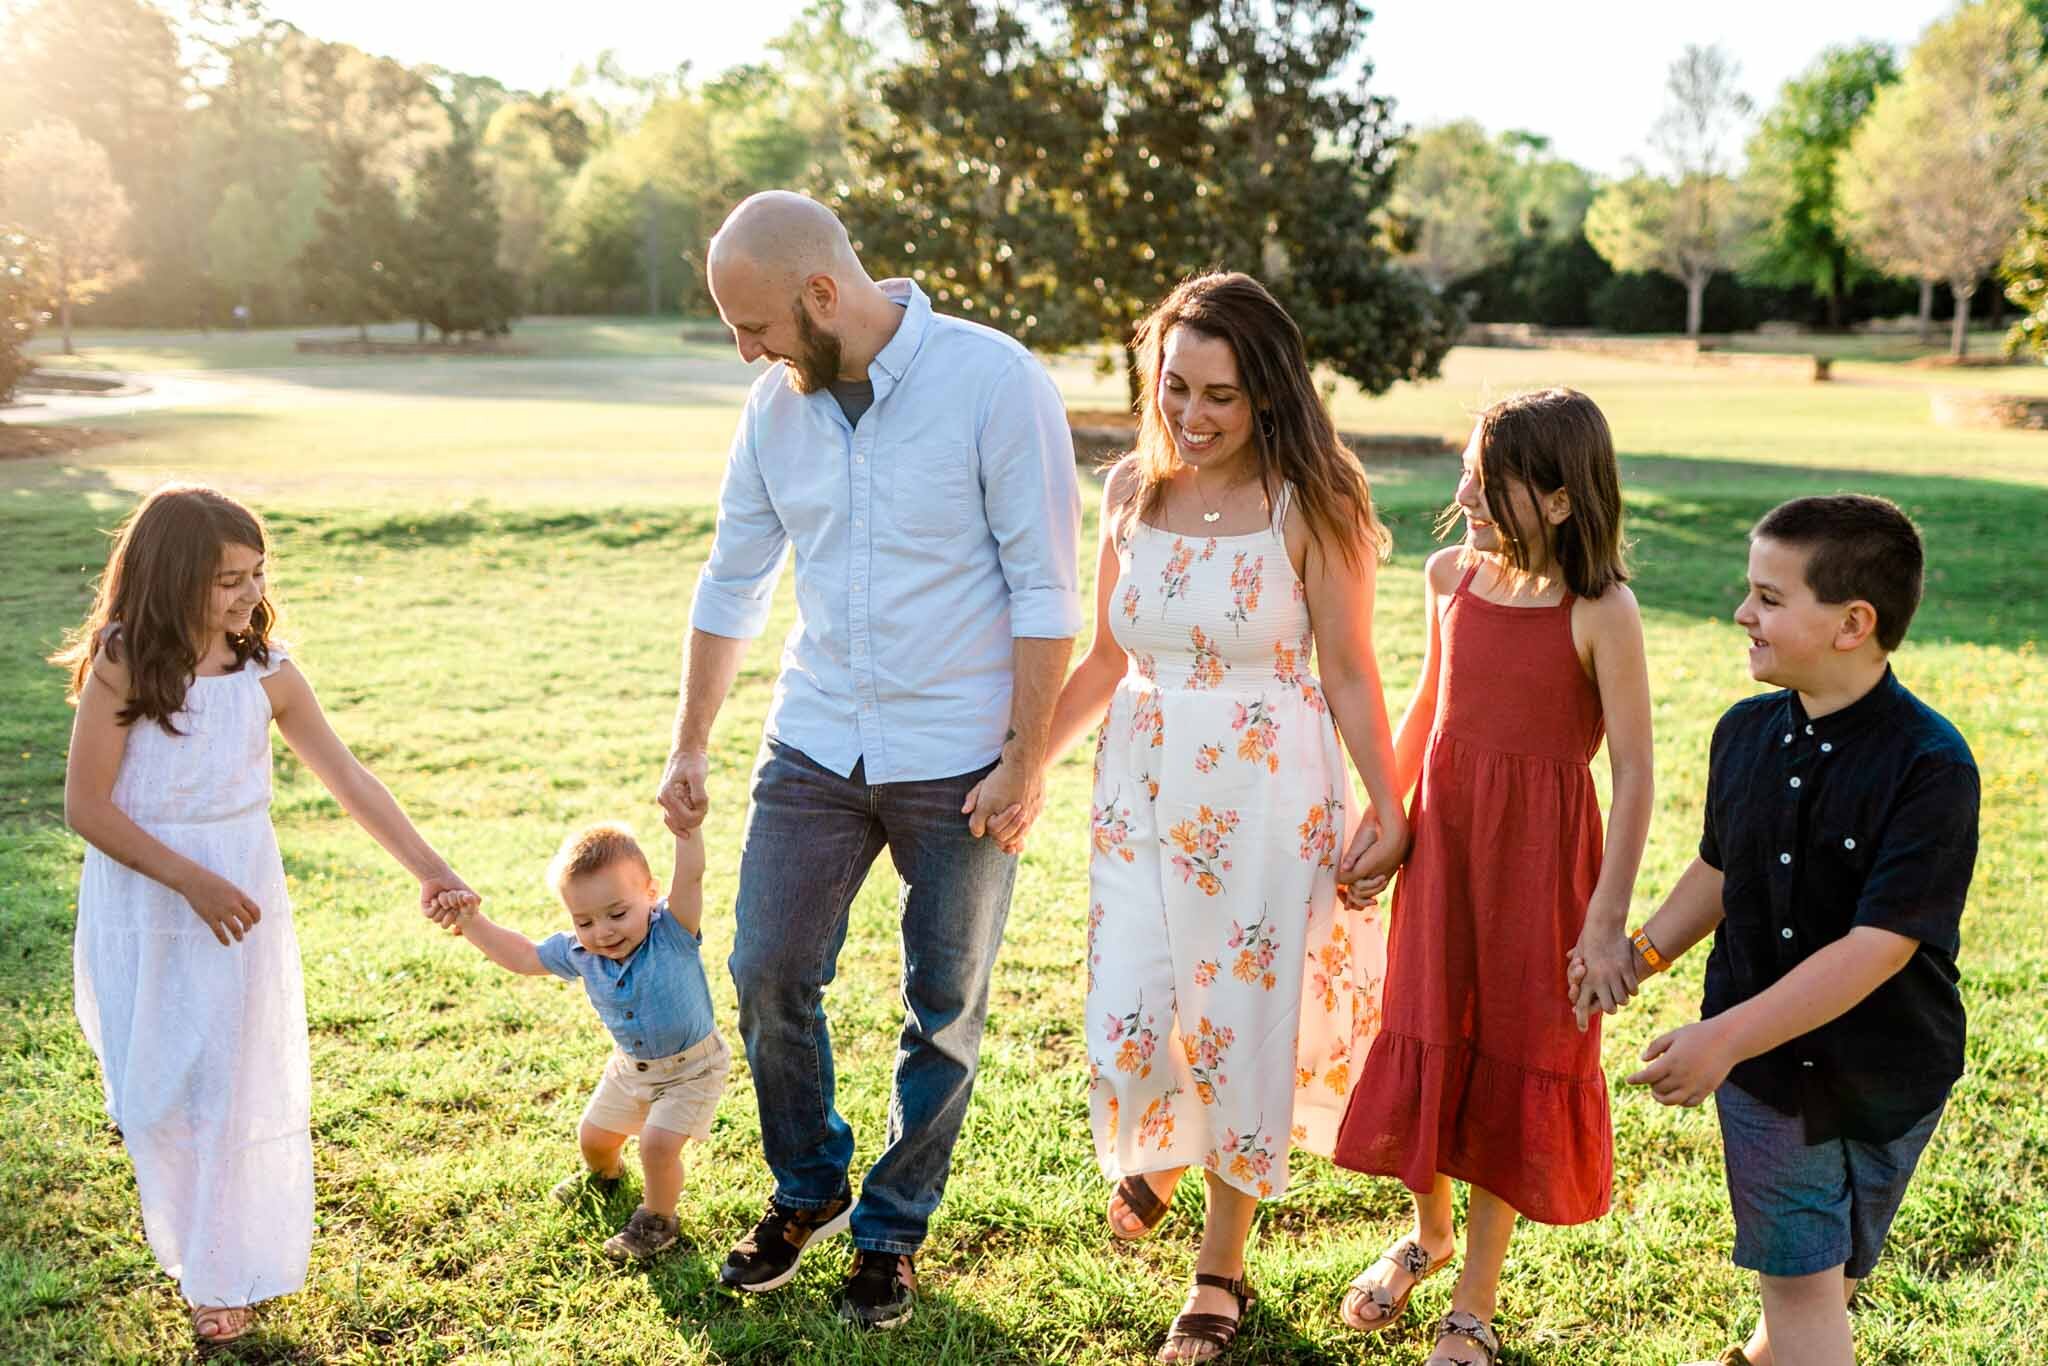 Raleigh Family Photographer | Joyner Park | By G. Lin Photography | Family holding hands and walking together